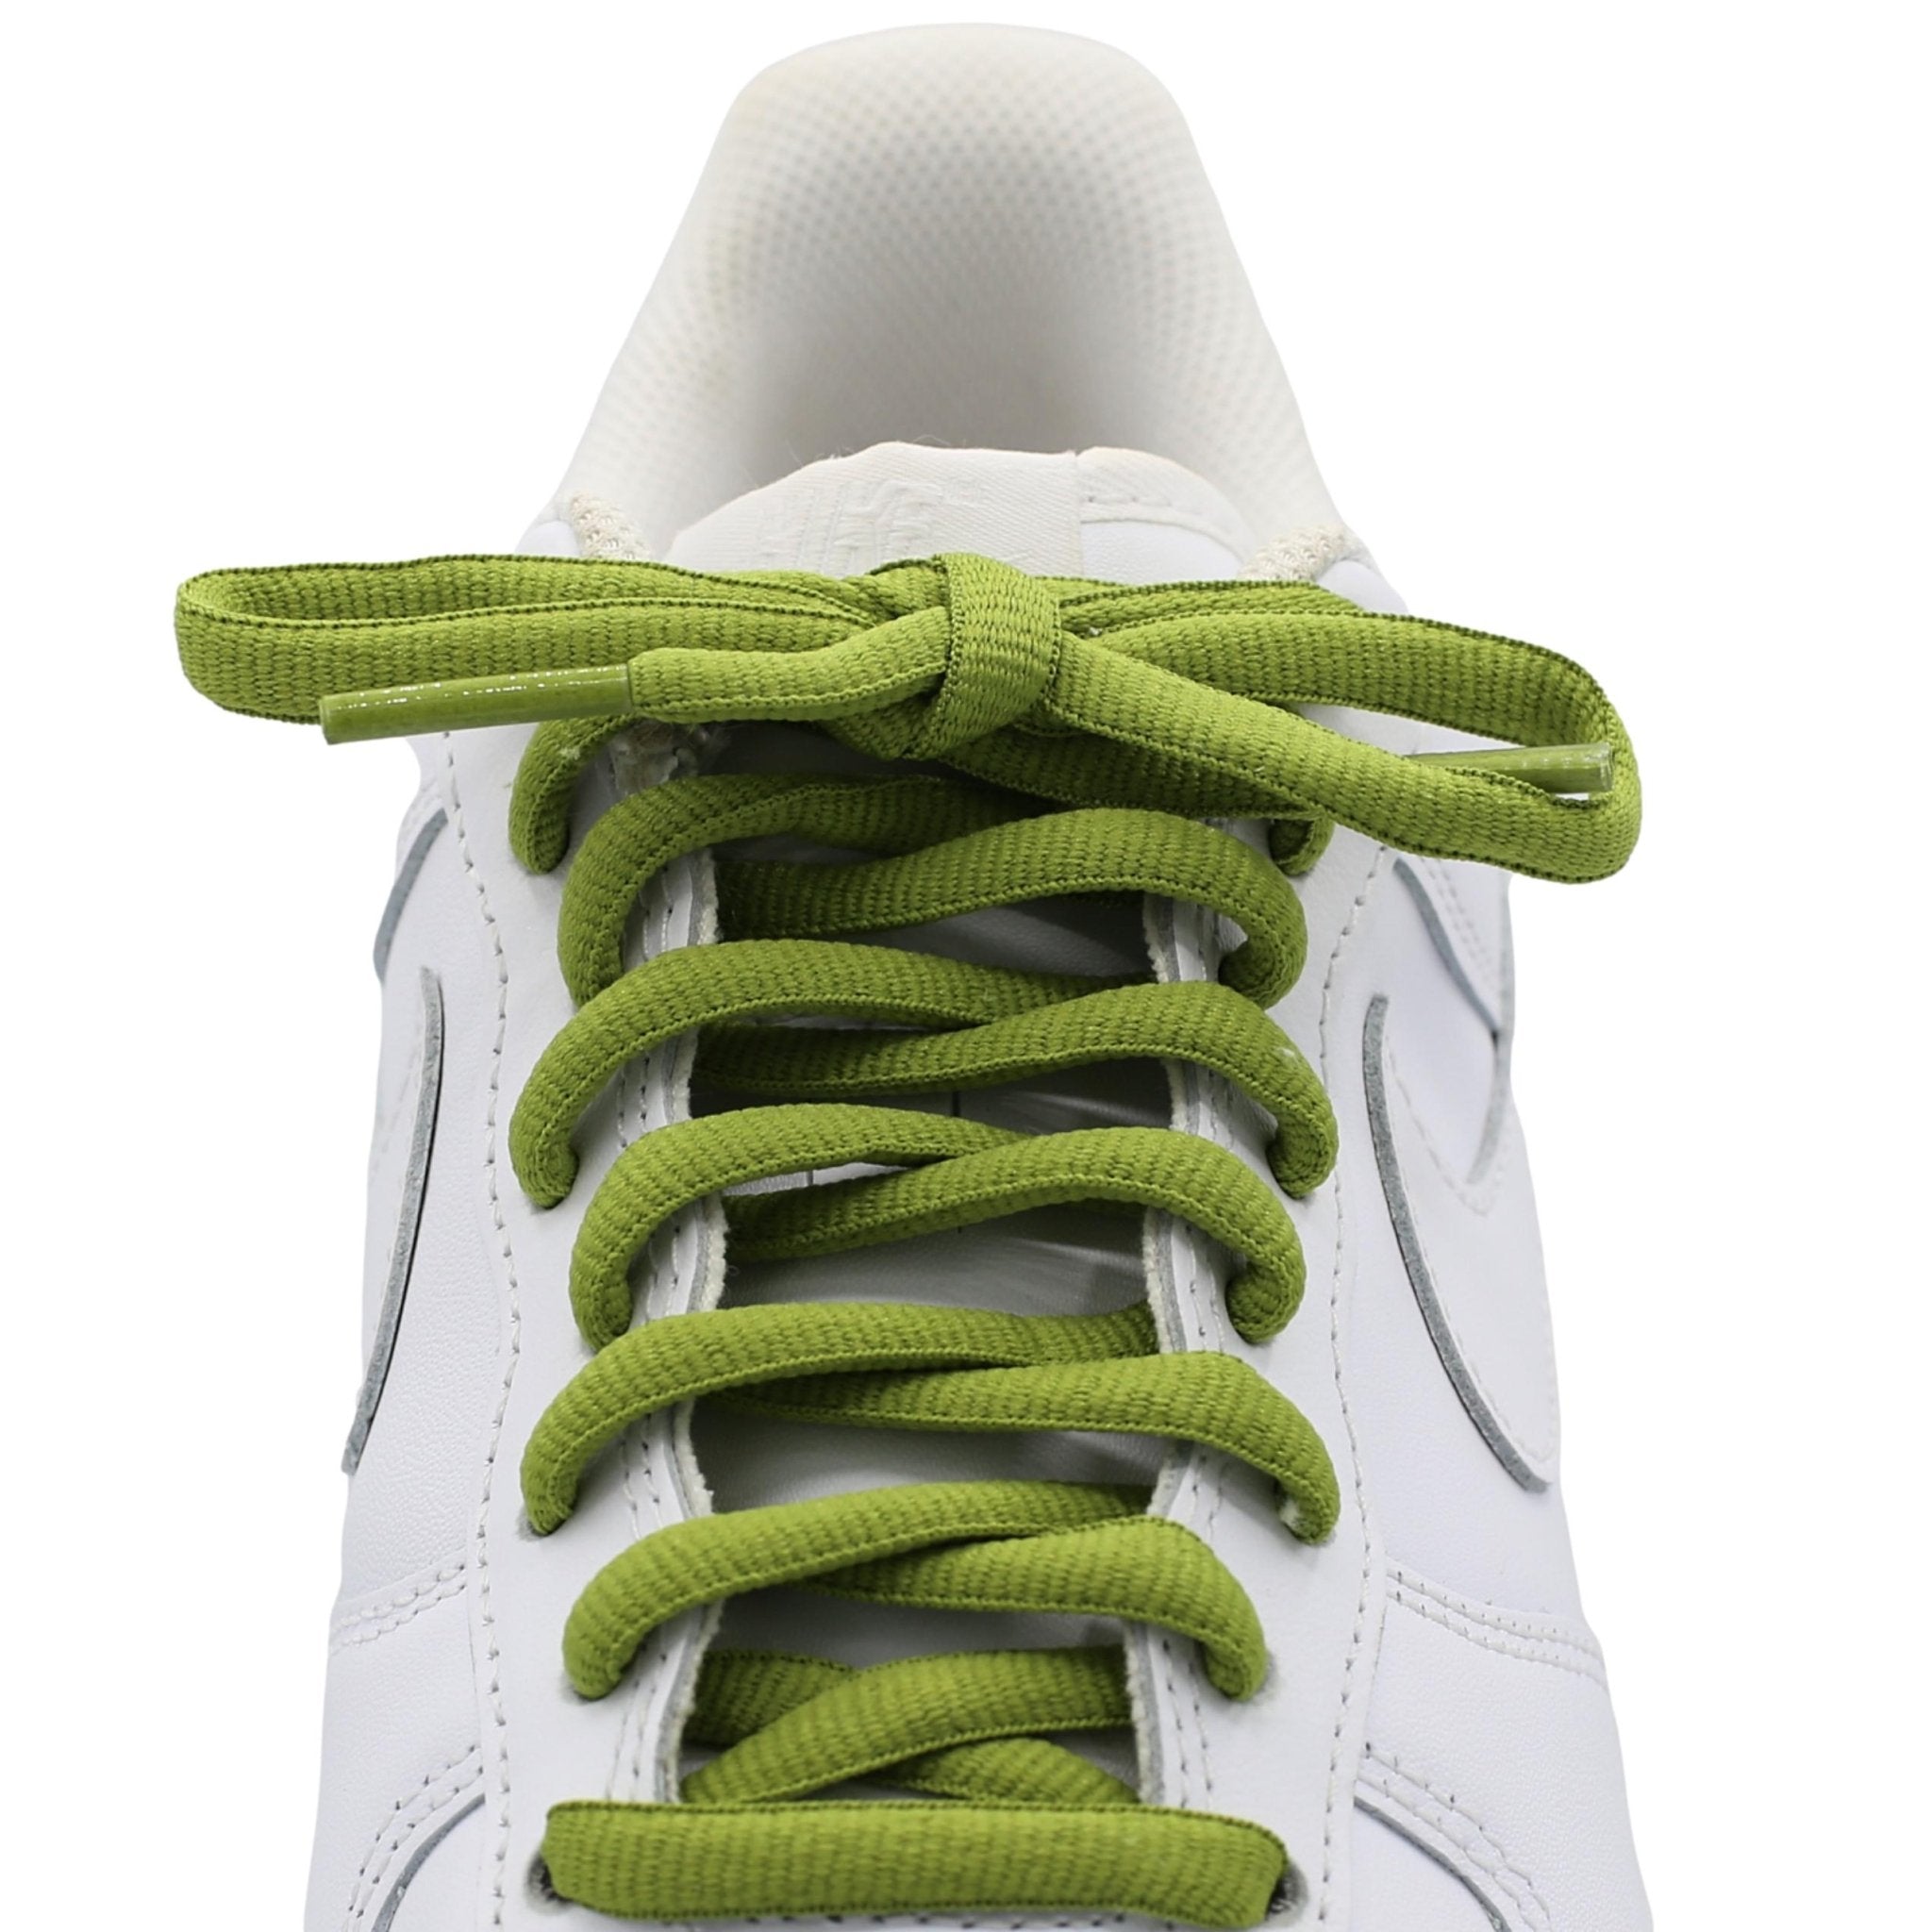 Thick Oval Shoe Laces (Nike SB Laces) – Shoe Lace Supply